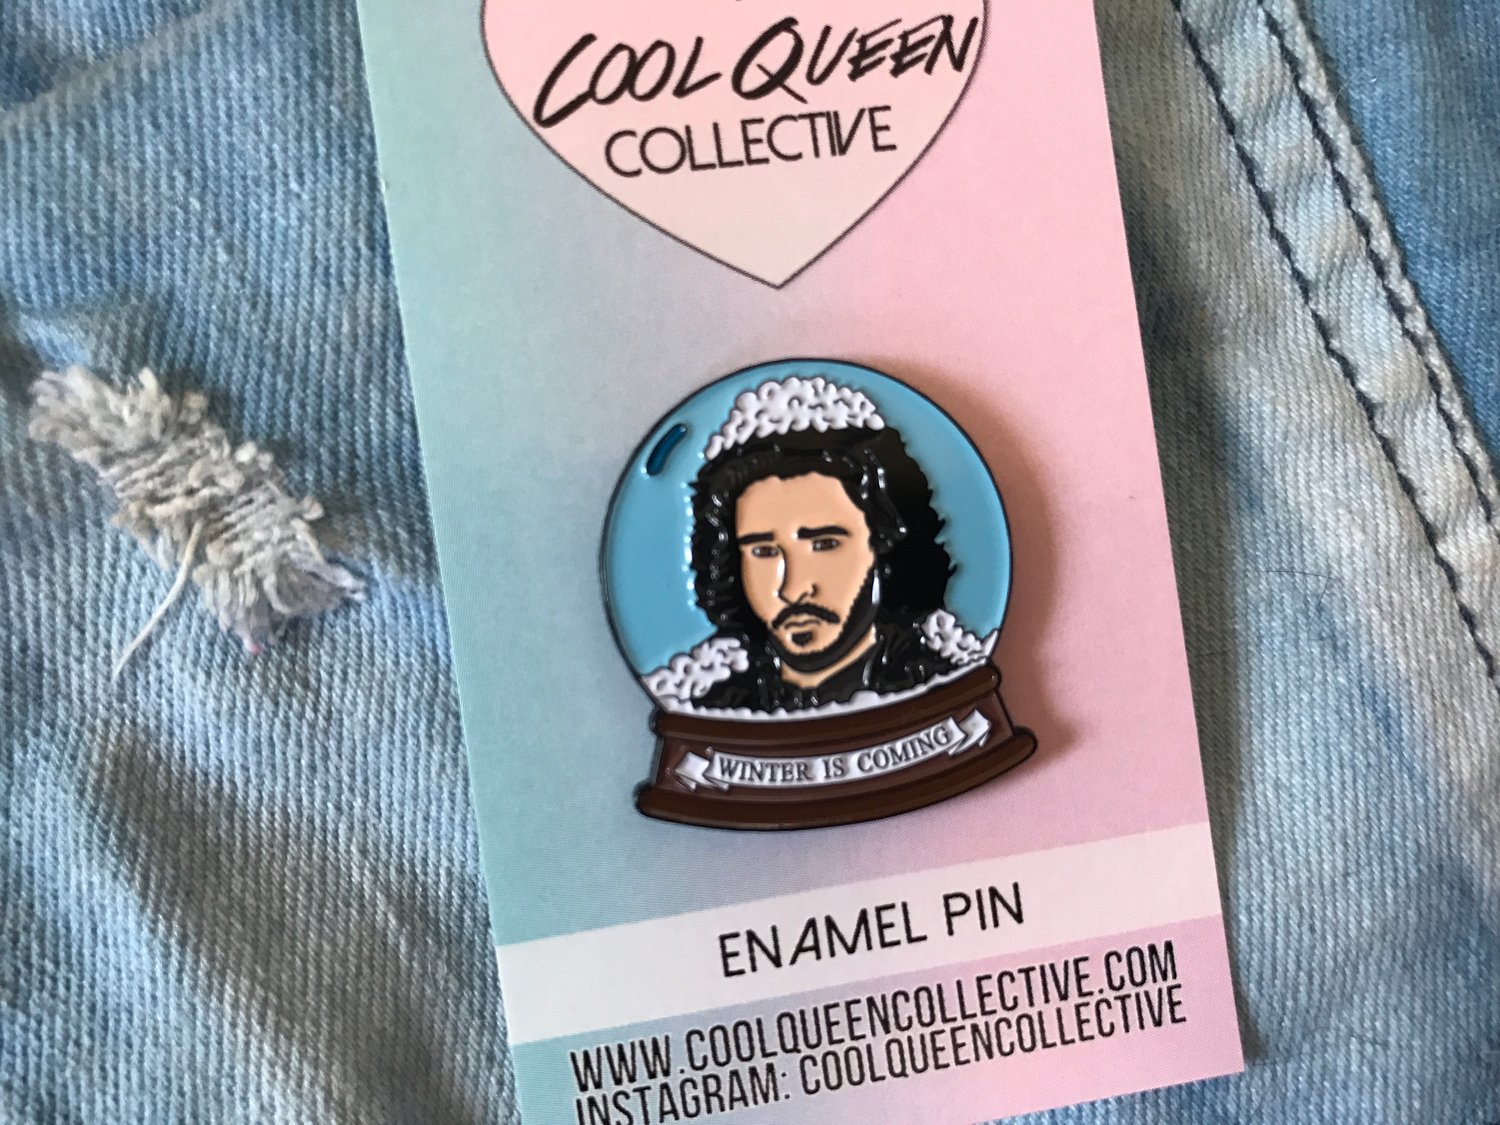 What Are My Best Selling Pins? 